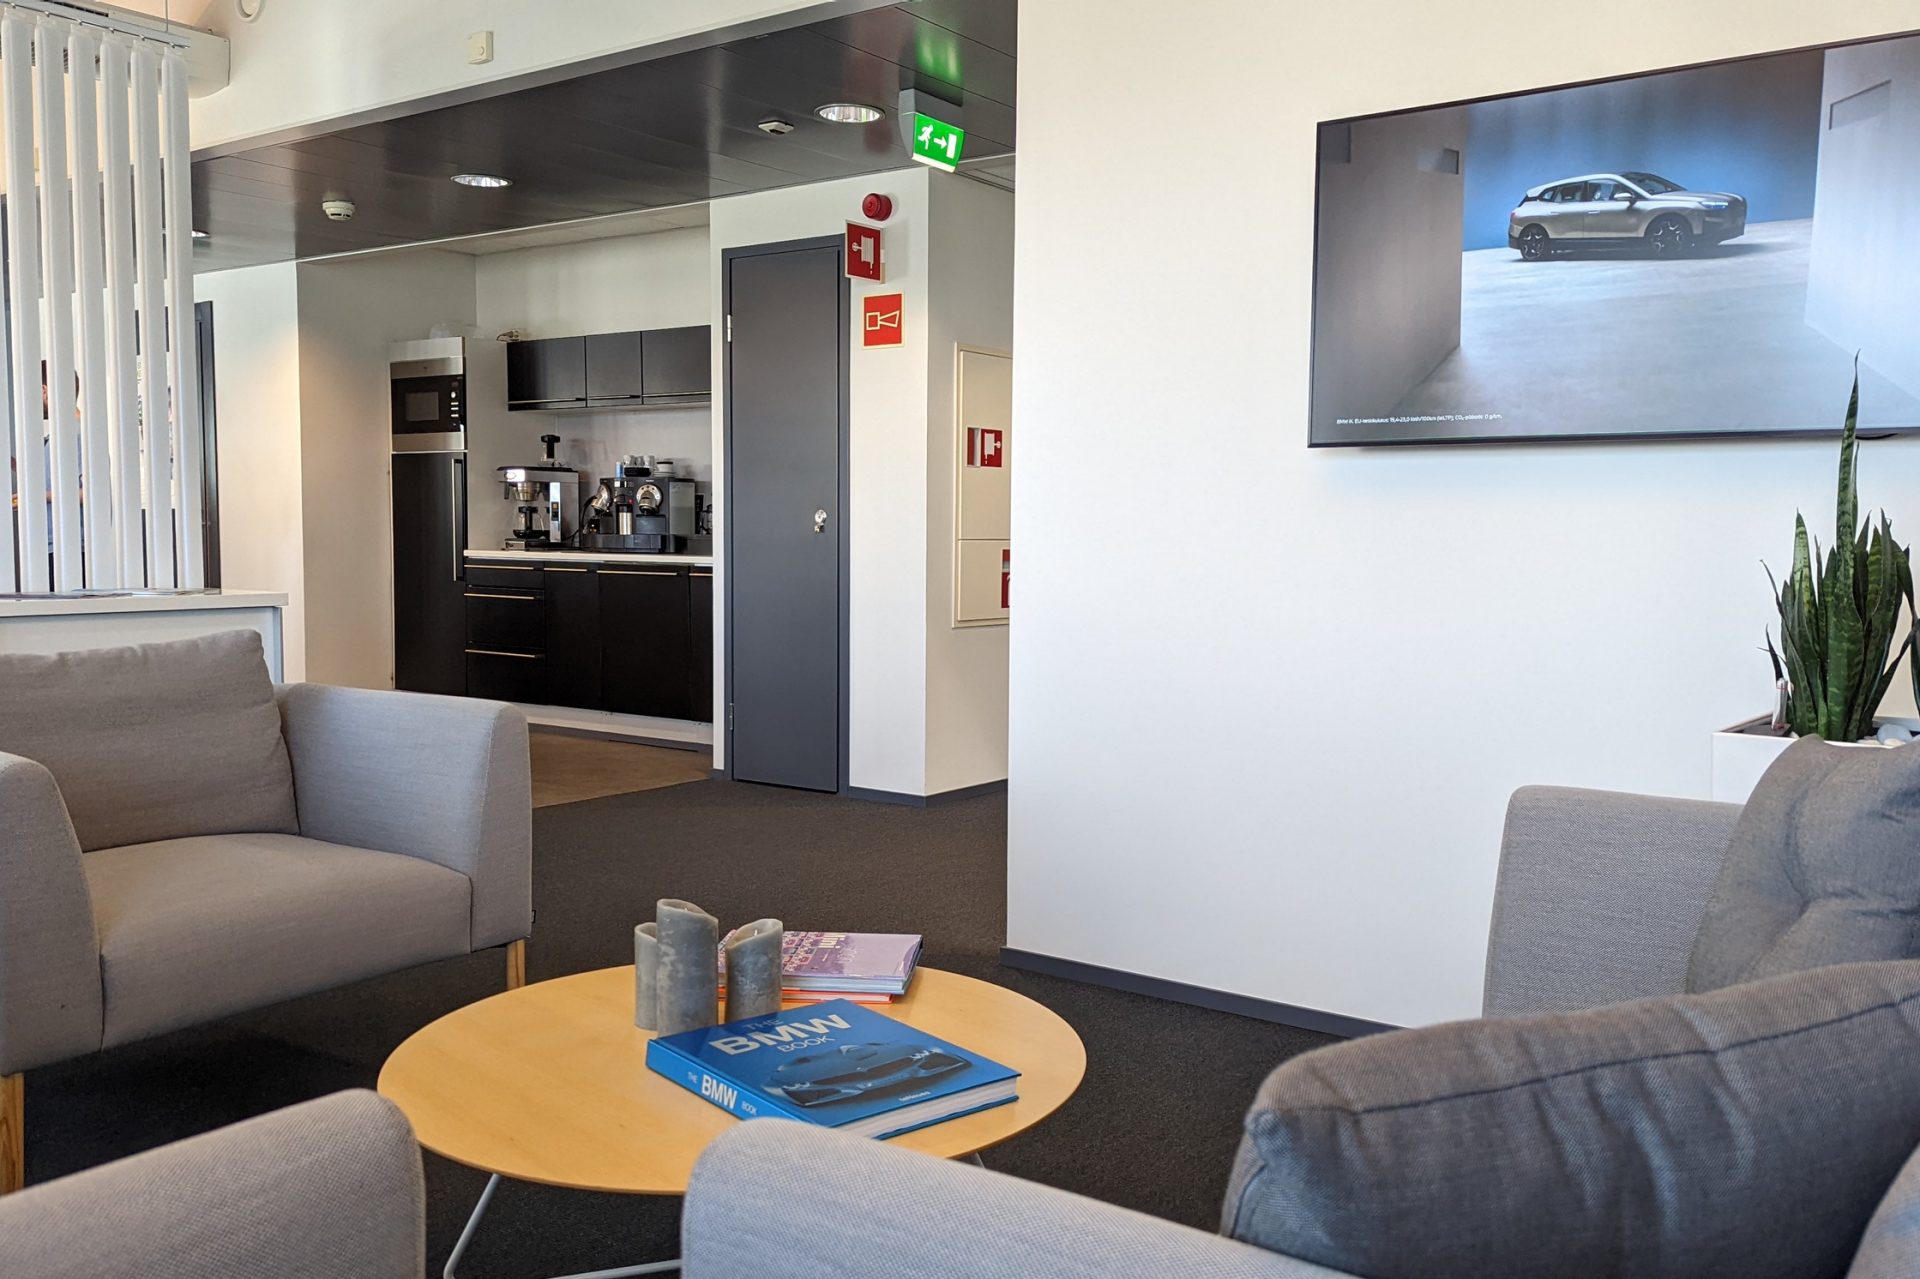 This picture shows the interior-view of a BMW office in Finland.